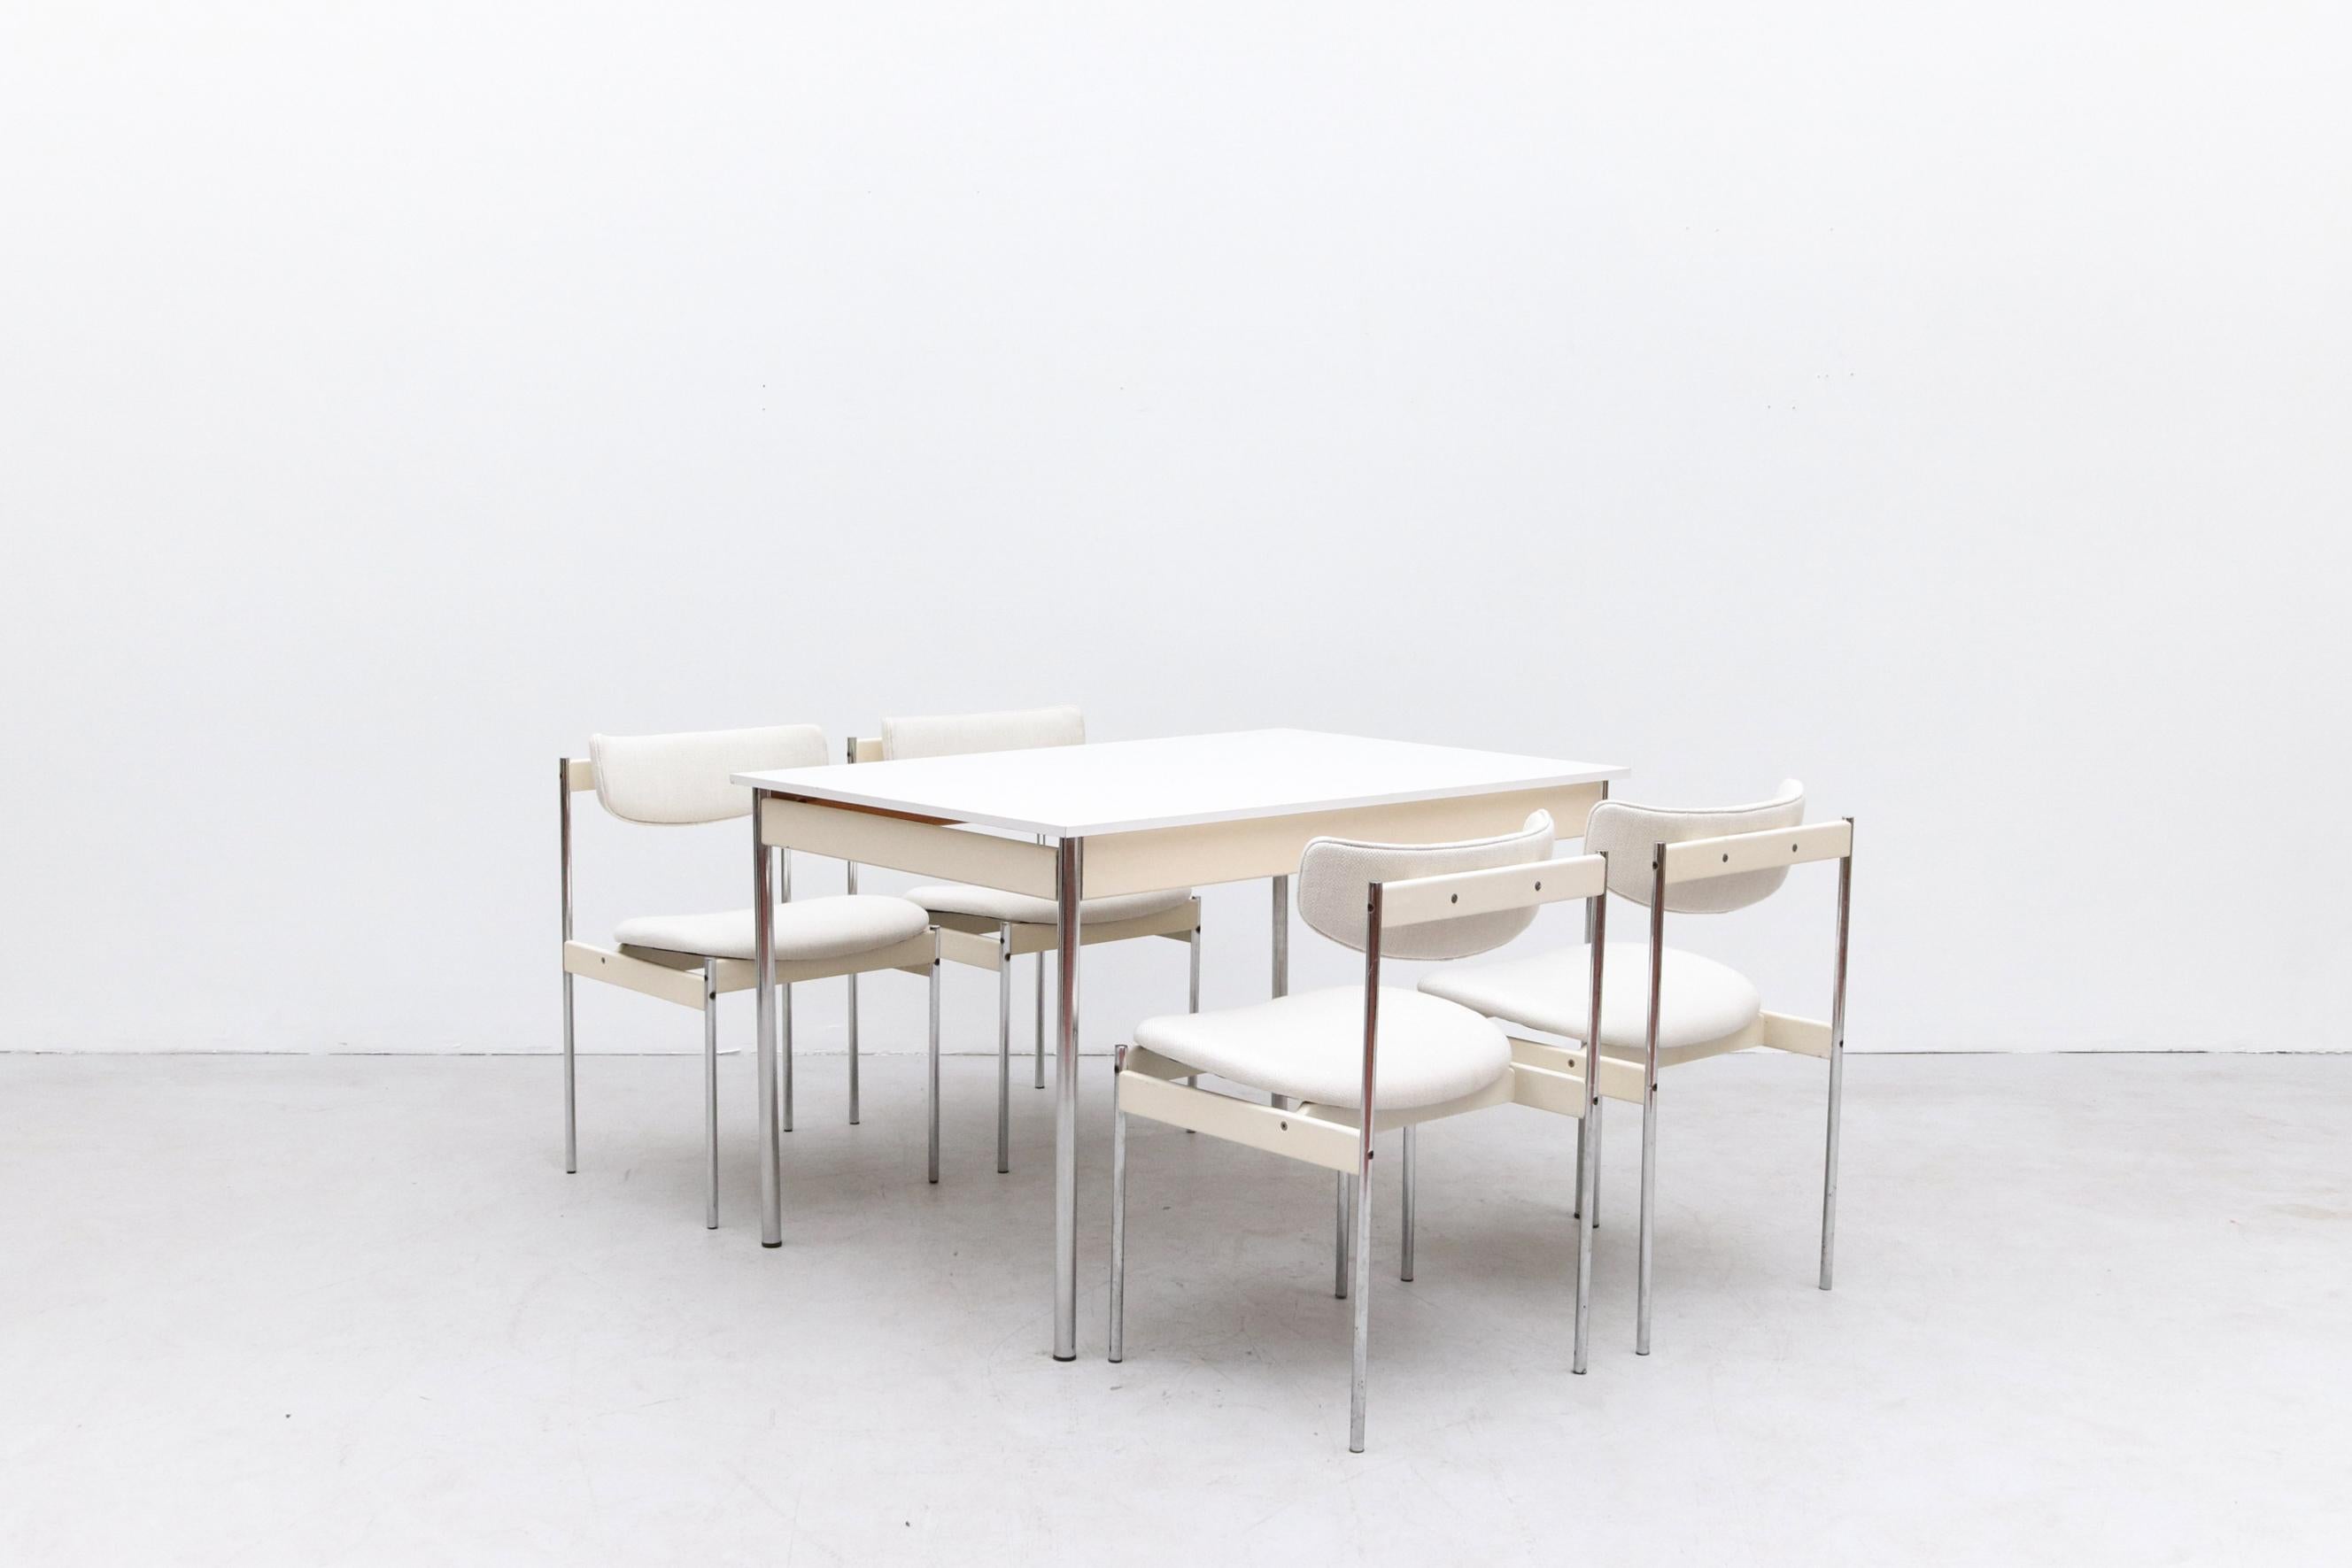 Thereca Dining Set with White Formica and Chrome Table and Matching Newly Upholstered Chairs with White Painted Wood and Chrome Legs. Chairs Measure 20 x 19.75 x 18/30. Table and Chair Frames are in Original Condition with Wear Consistent with its